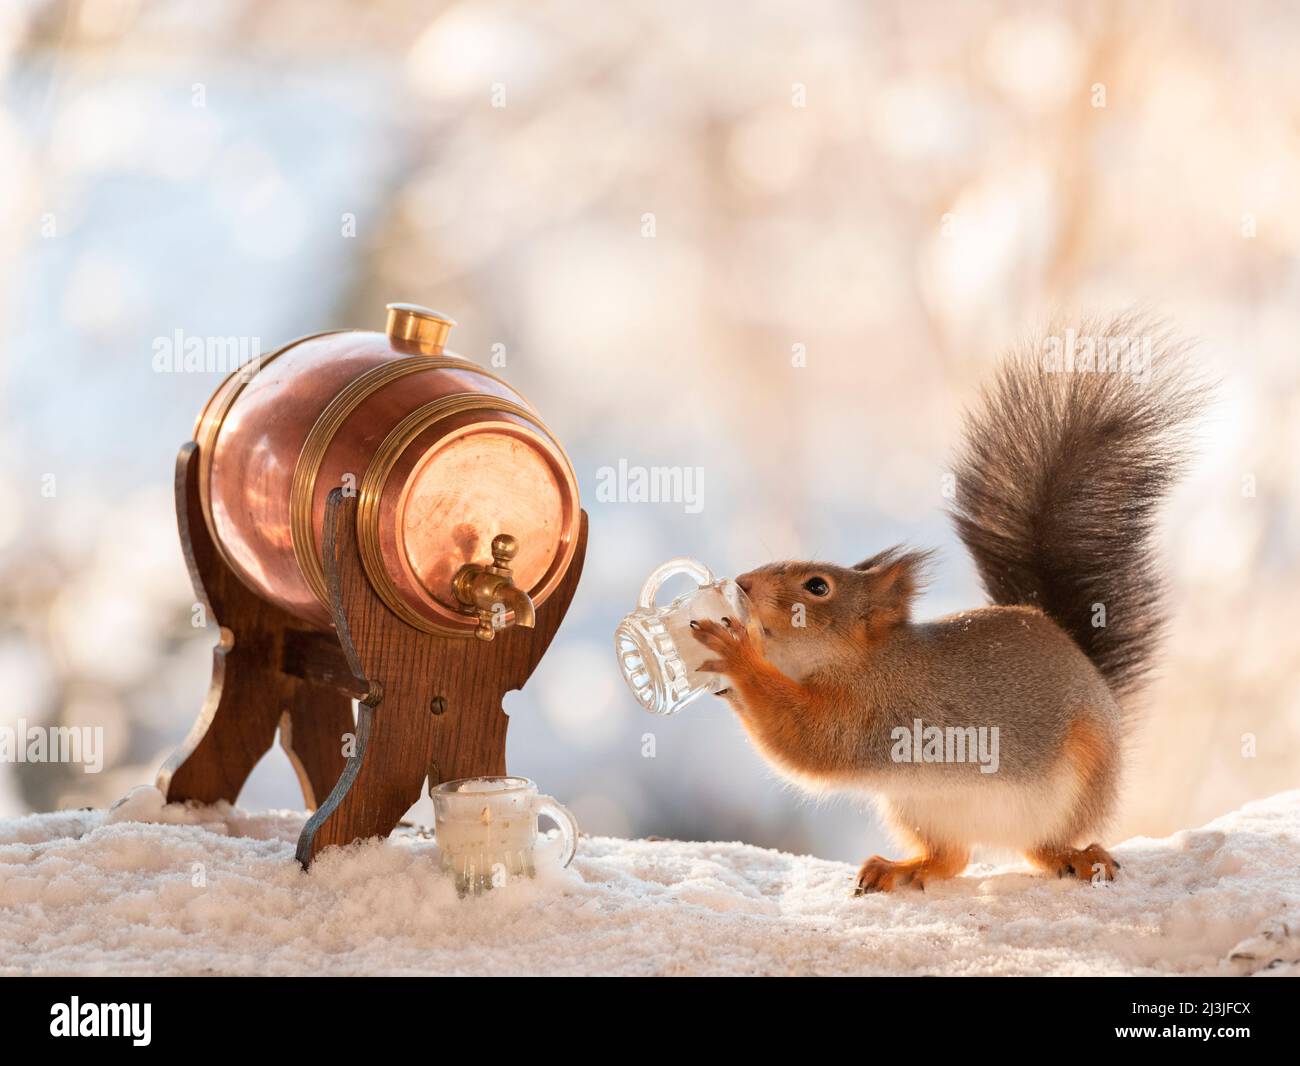 Red Squirrel holding a mug with a beer barrel in snow Stock Photo